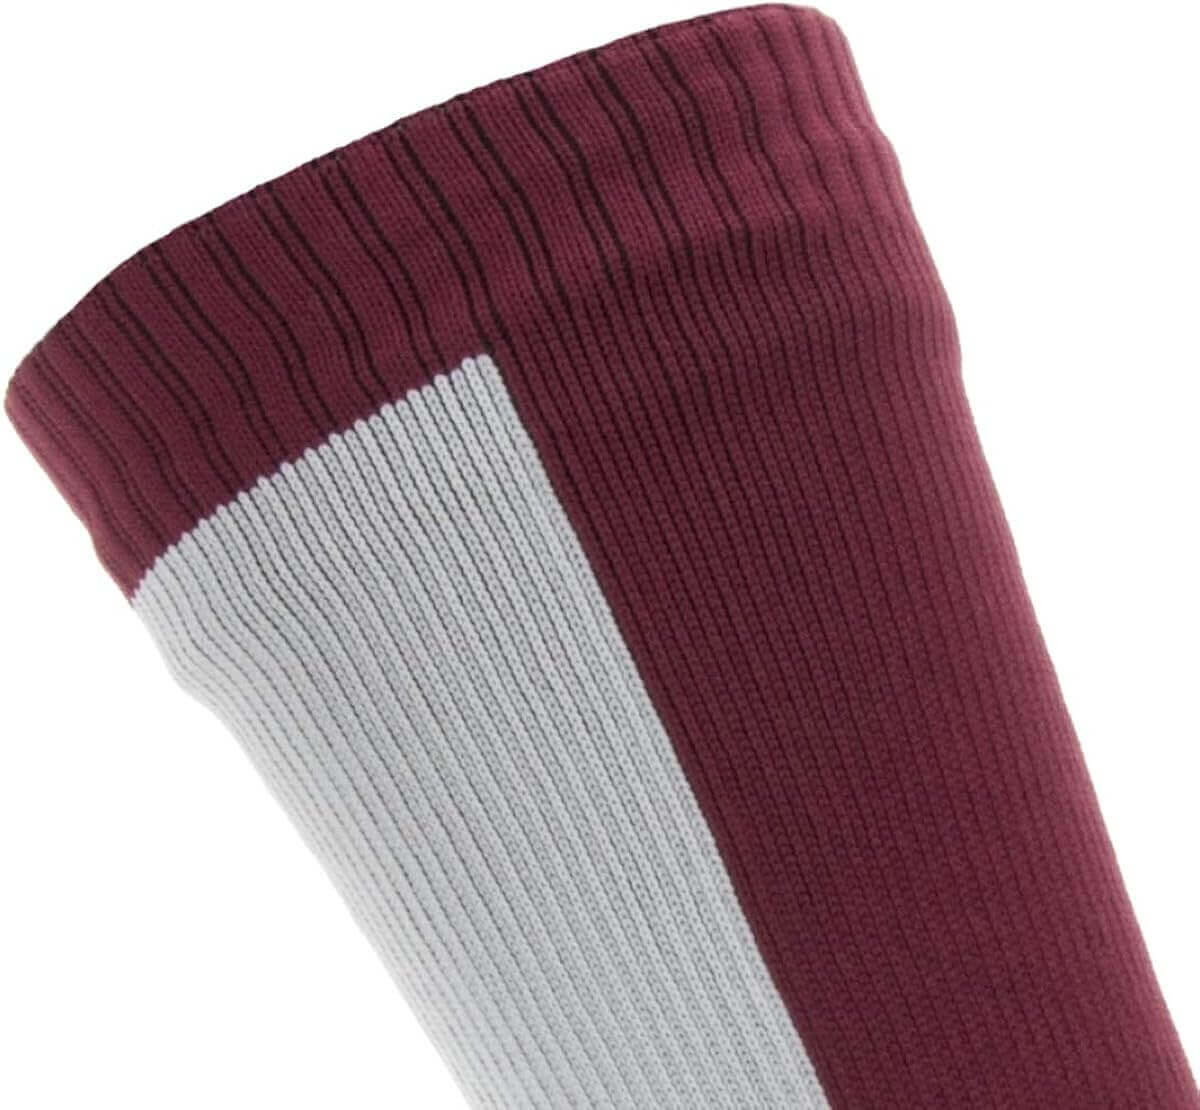 Shop The Latest >SEALSKINZ Women's Waterproof Cold Weather Mid Length Socks > *Only $59.93*> From The Top Brand > *SEALSKINZl* > Shop Now and Get Free Shipping On Orders Over $45.00 >*Shop Earth Foot*